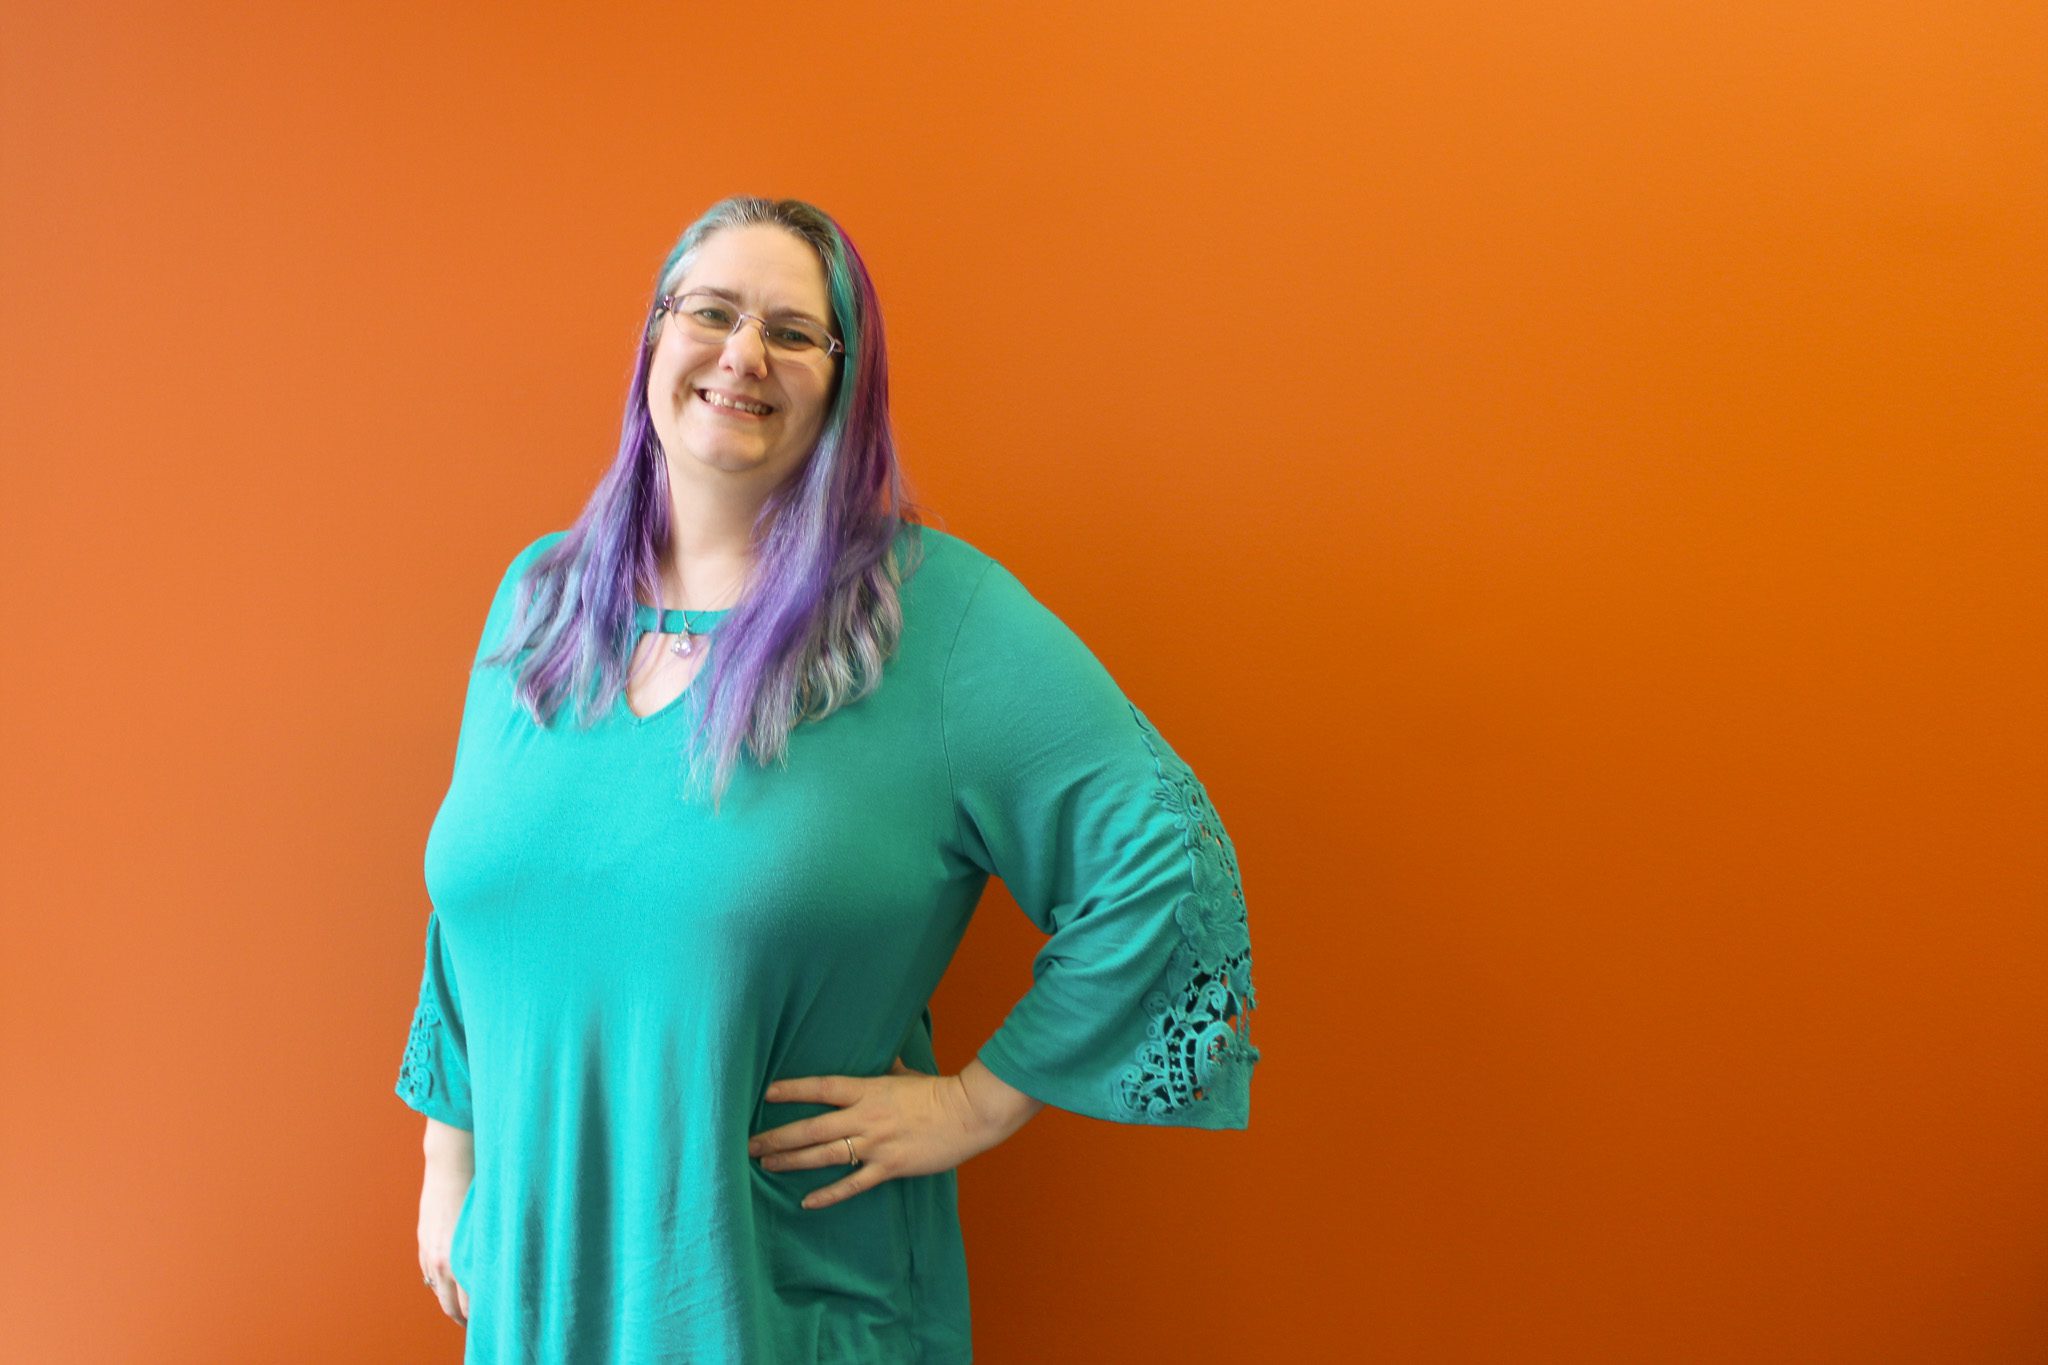 A person wearing a green top stands against an orange background, with their face obscured for privacy. The individual has long, multi-colored hair with prominent shades of blue and purple. They are posing with one hand on their hip.